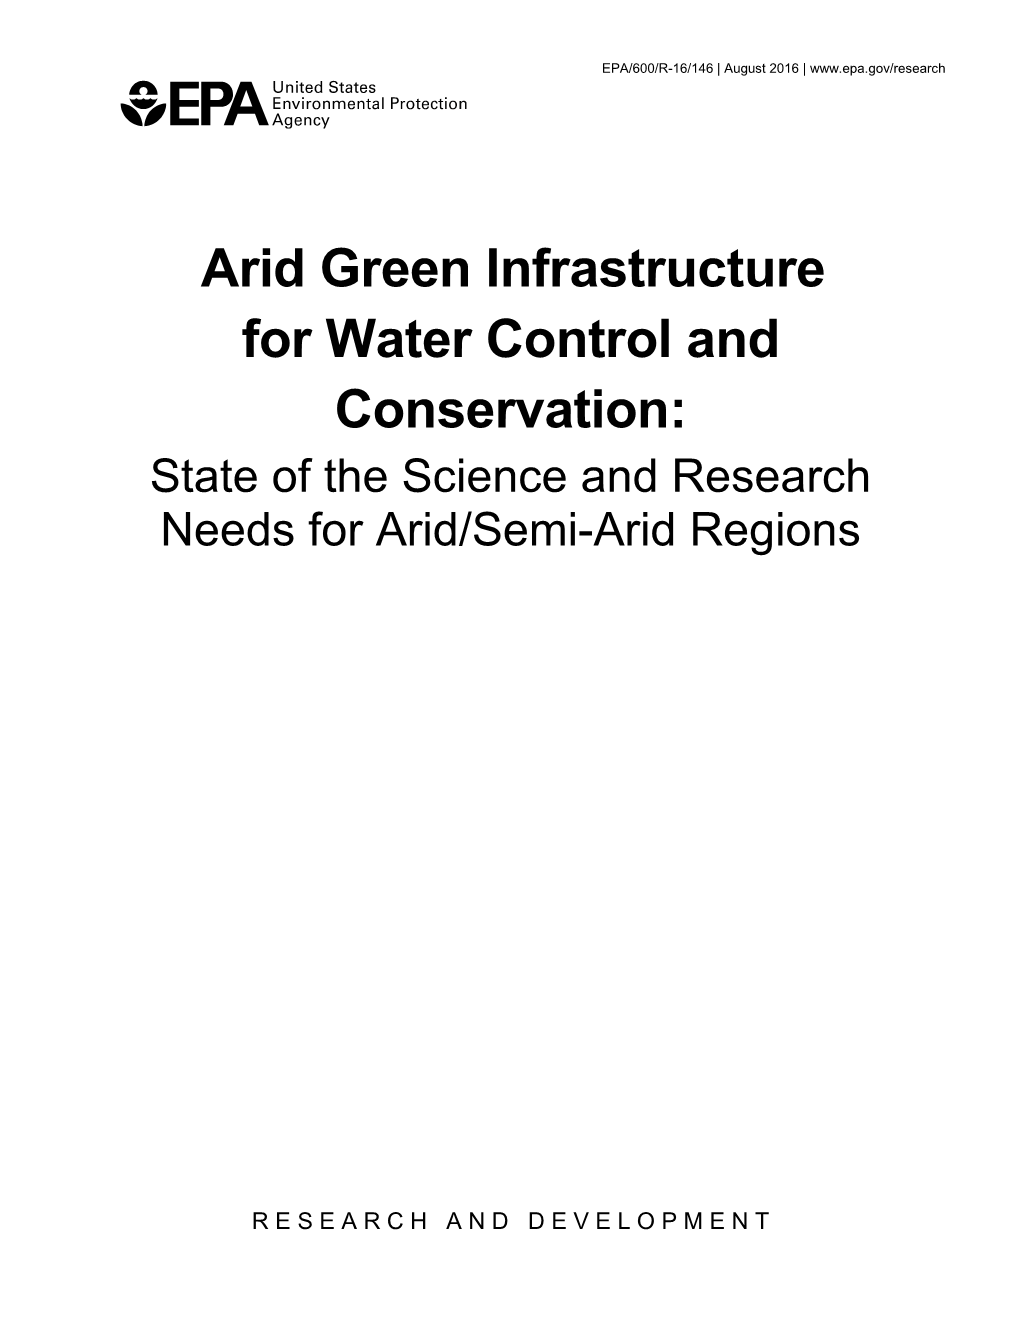 Arid Green Infrastructure for Water Control and Conservation: State of the Science and Research Needs for Arid/Semi-Arid Regions